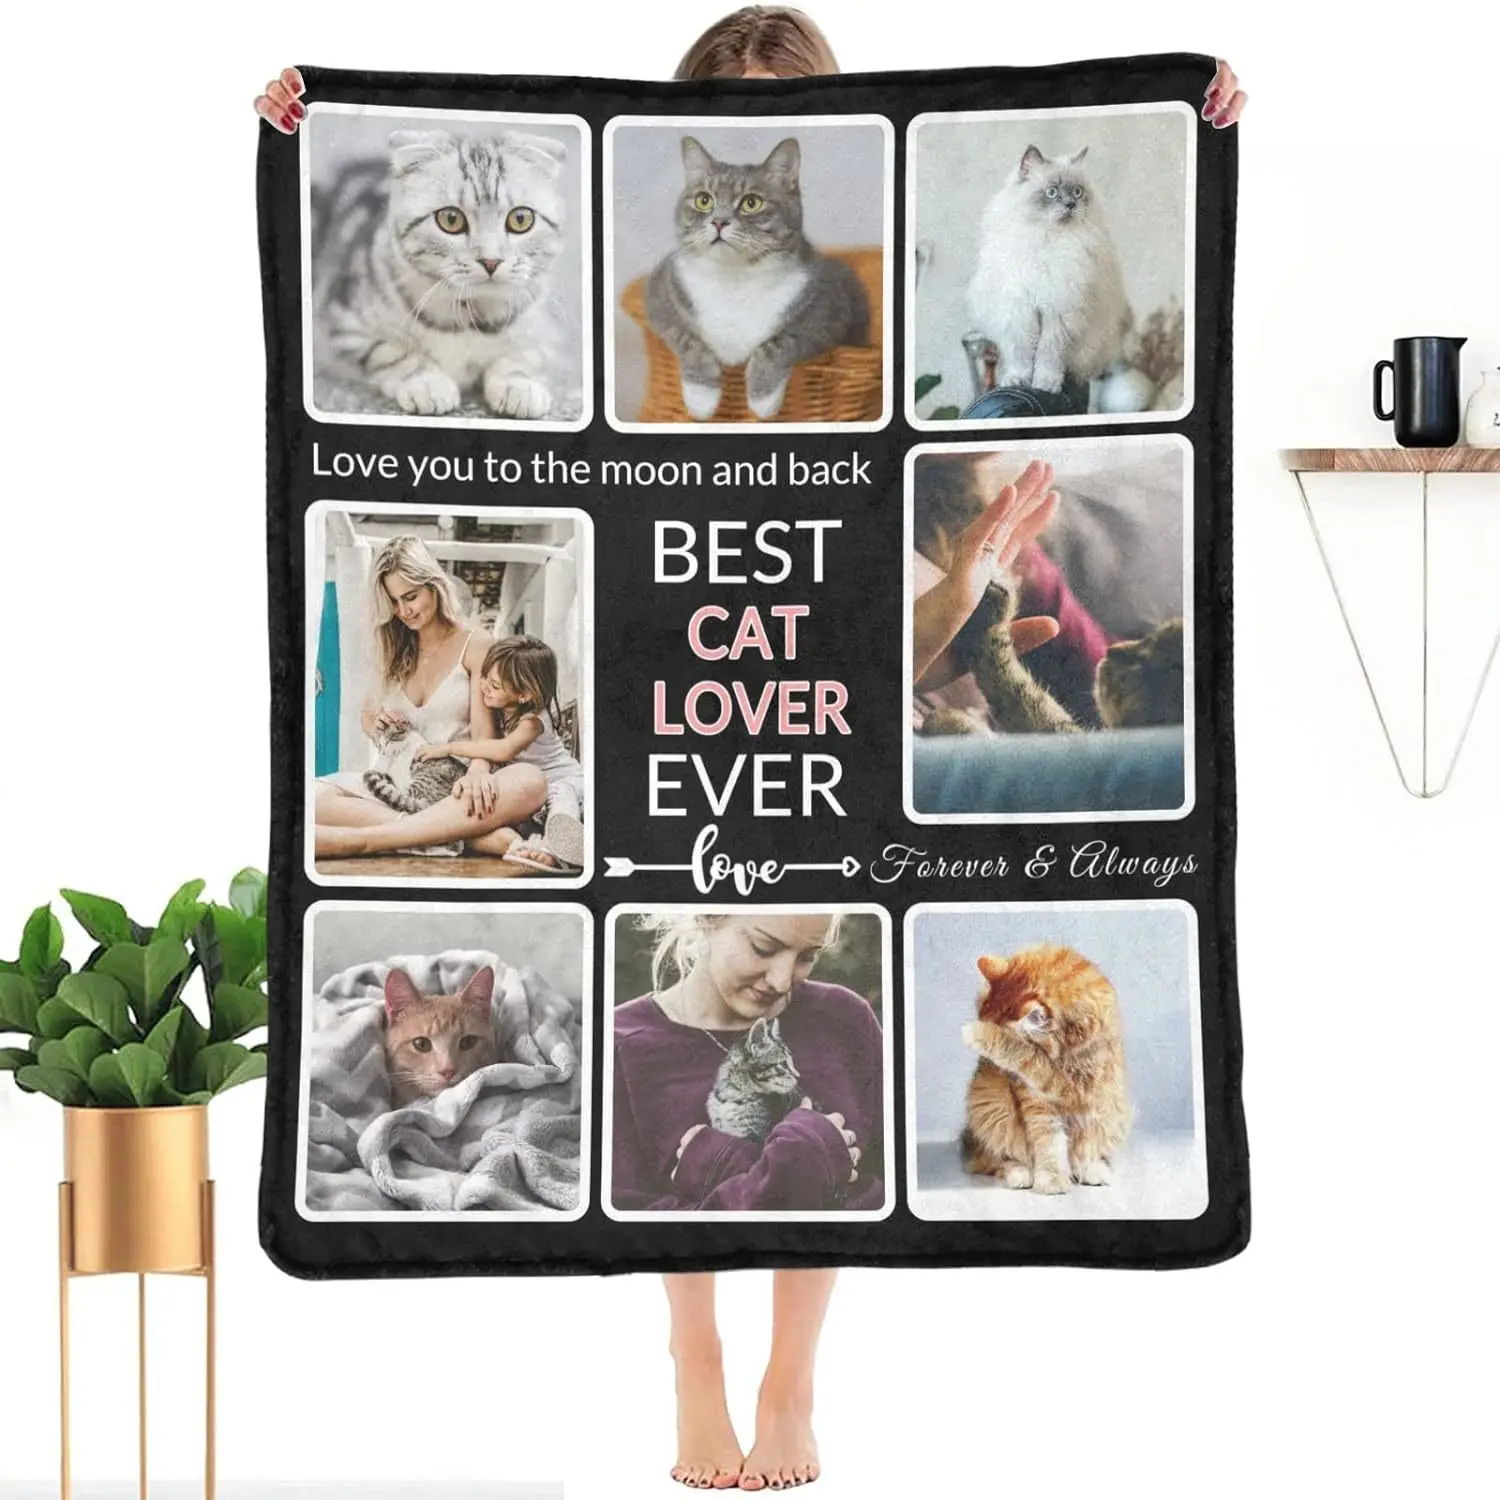 Customized blankets and photos for family gifts, personalized memory souvenirs for the best family and friends in history